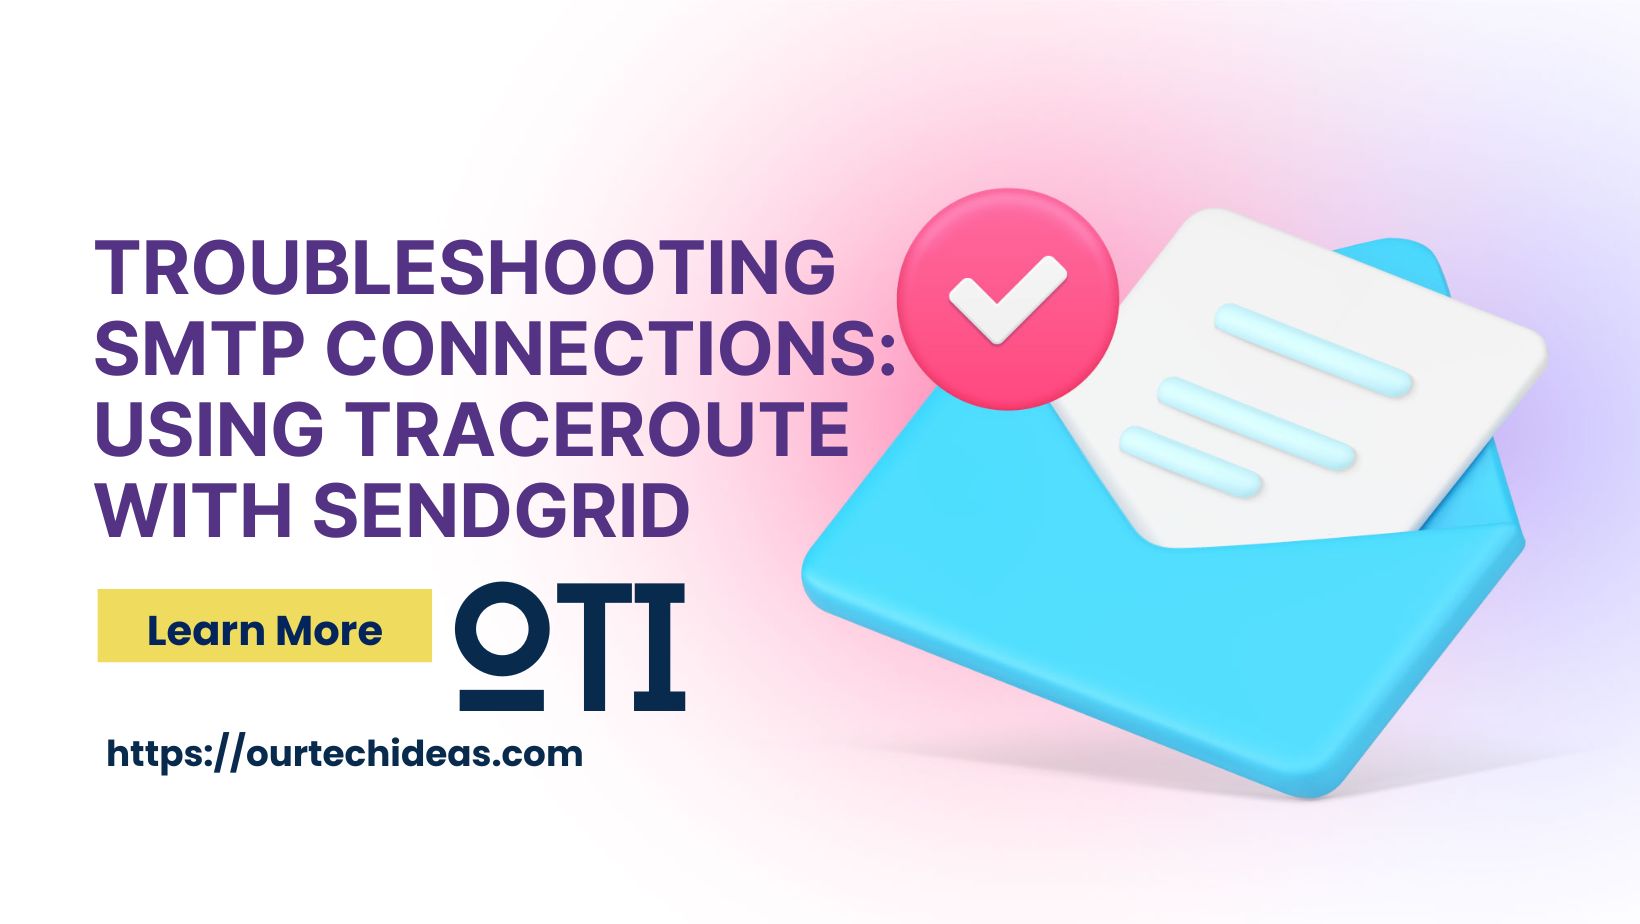 Troubleshooting SMTP Connections: Using Traceroute with SendGrid